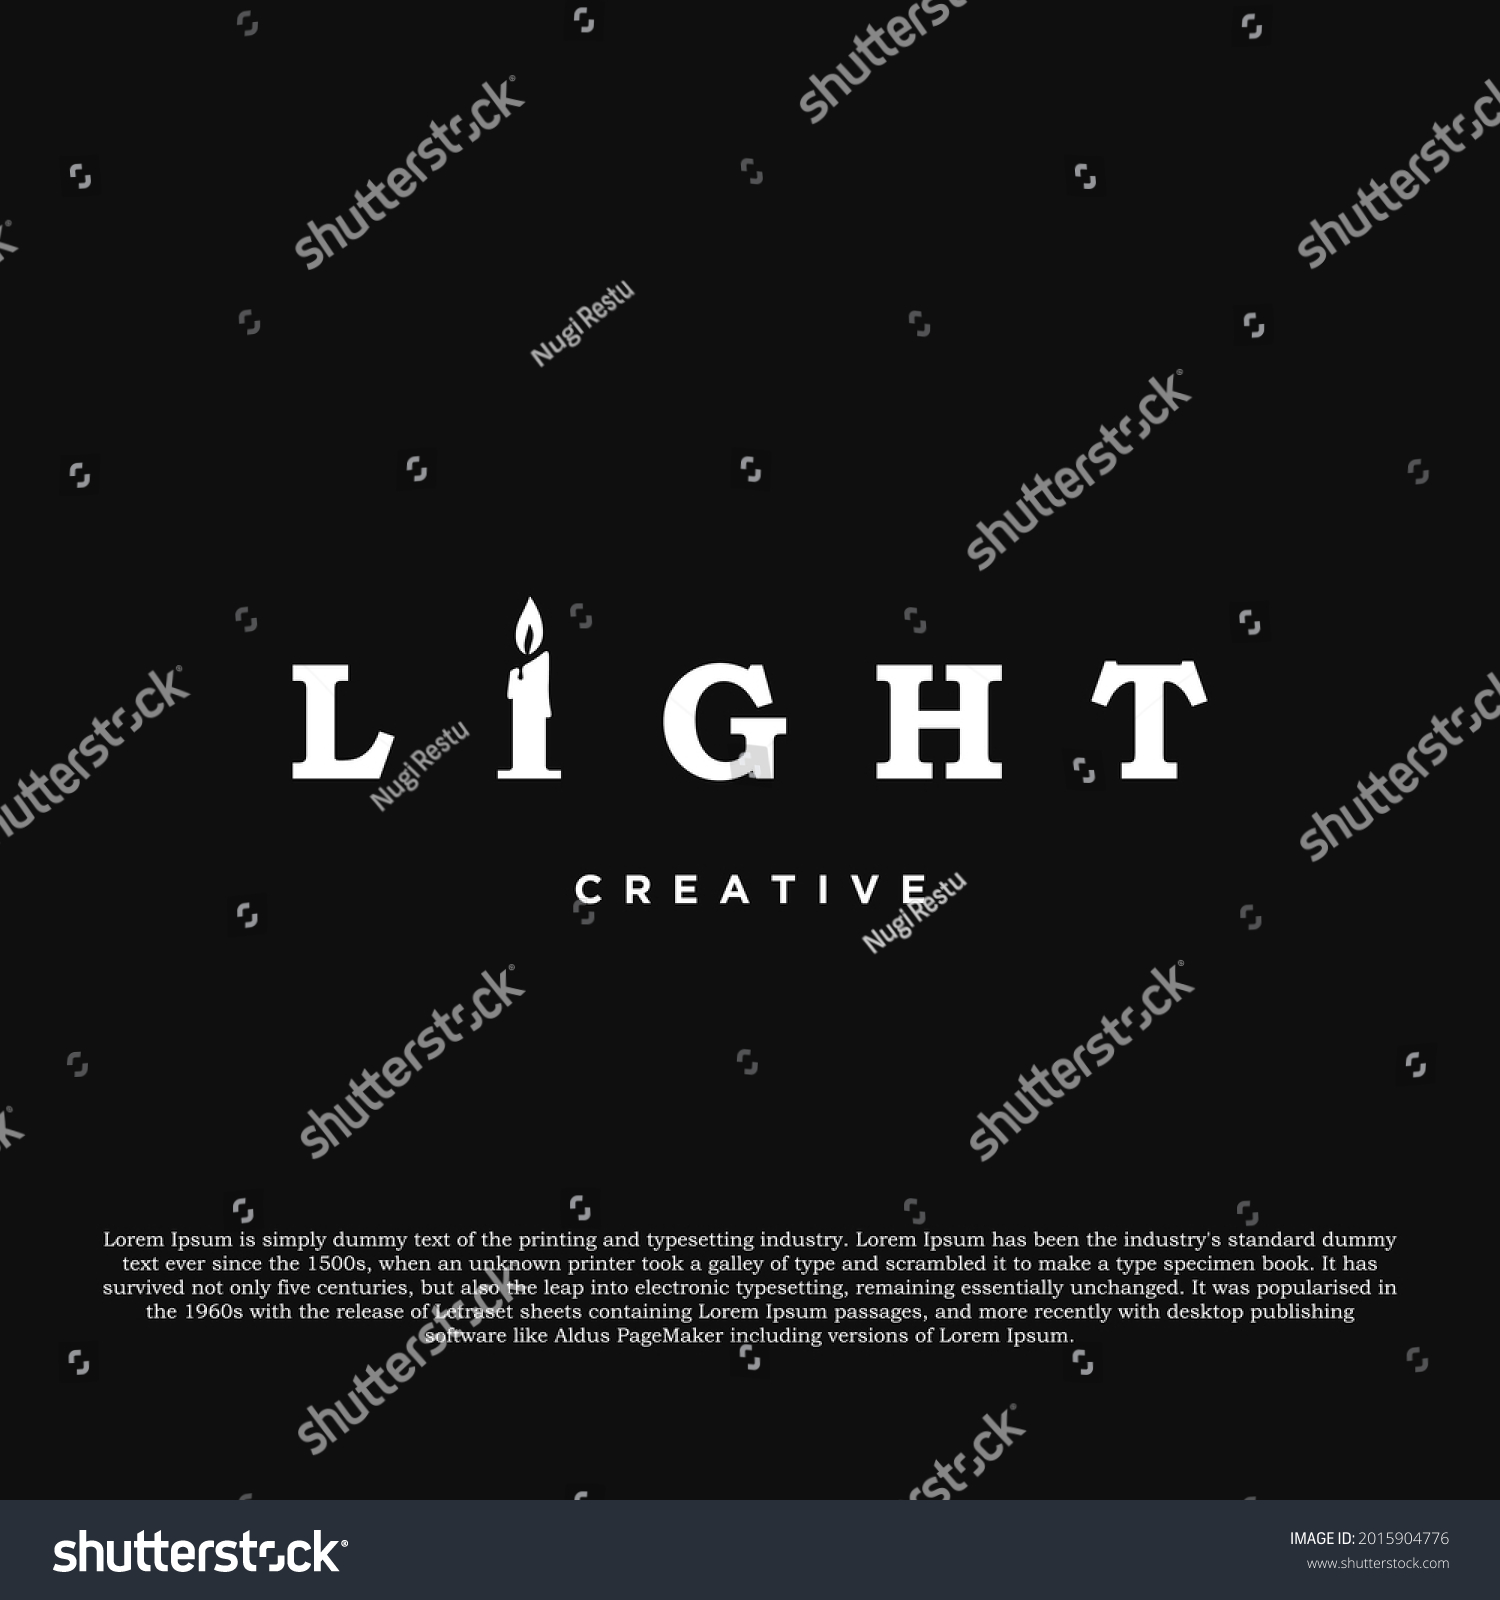 SVG of Light logotype design vector. light with candle creative logo isolated on black background svg